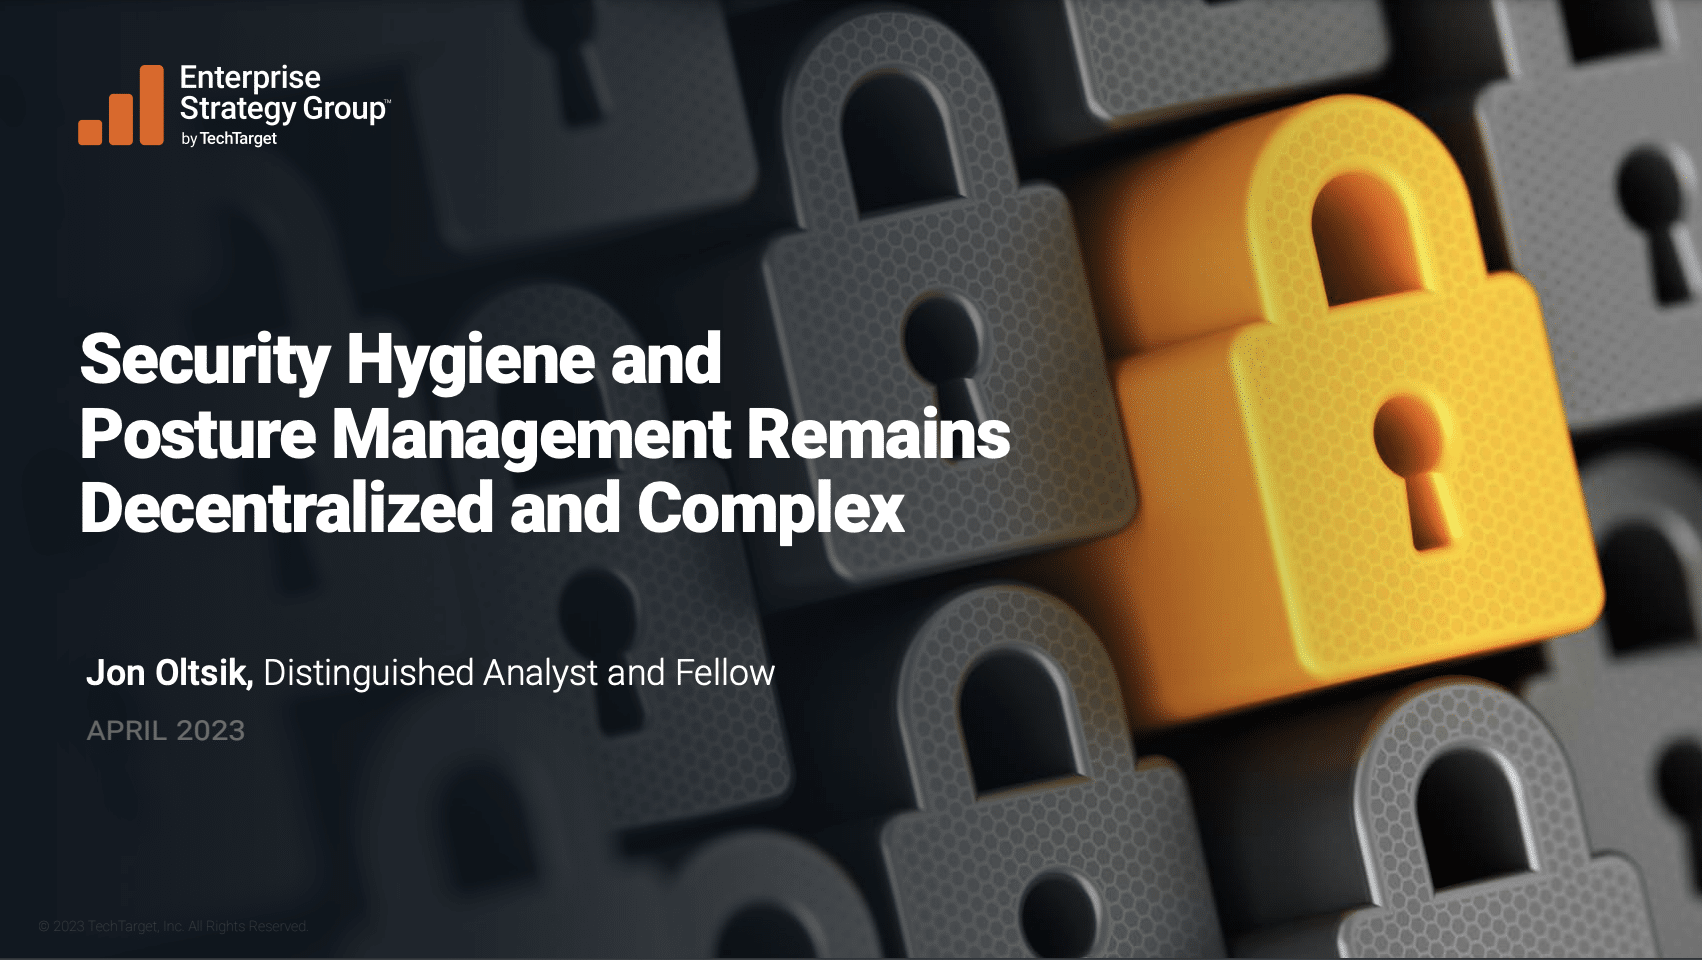 Cover of ESG Security Hygiene and Posture Management Report, April 2023. "Security Hygiene and Posture Management Remains Decentralized and Complex"